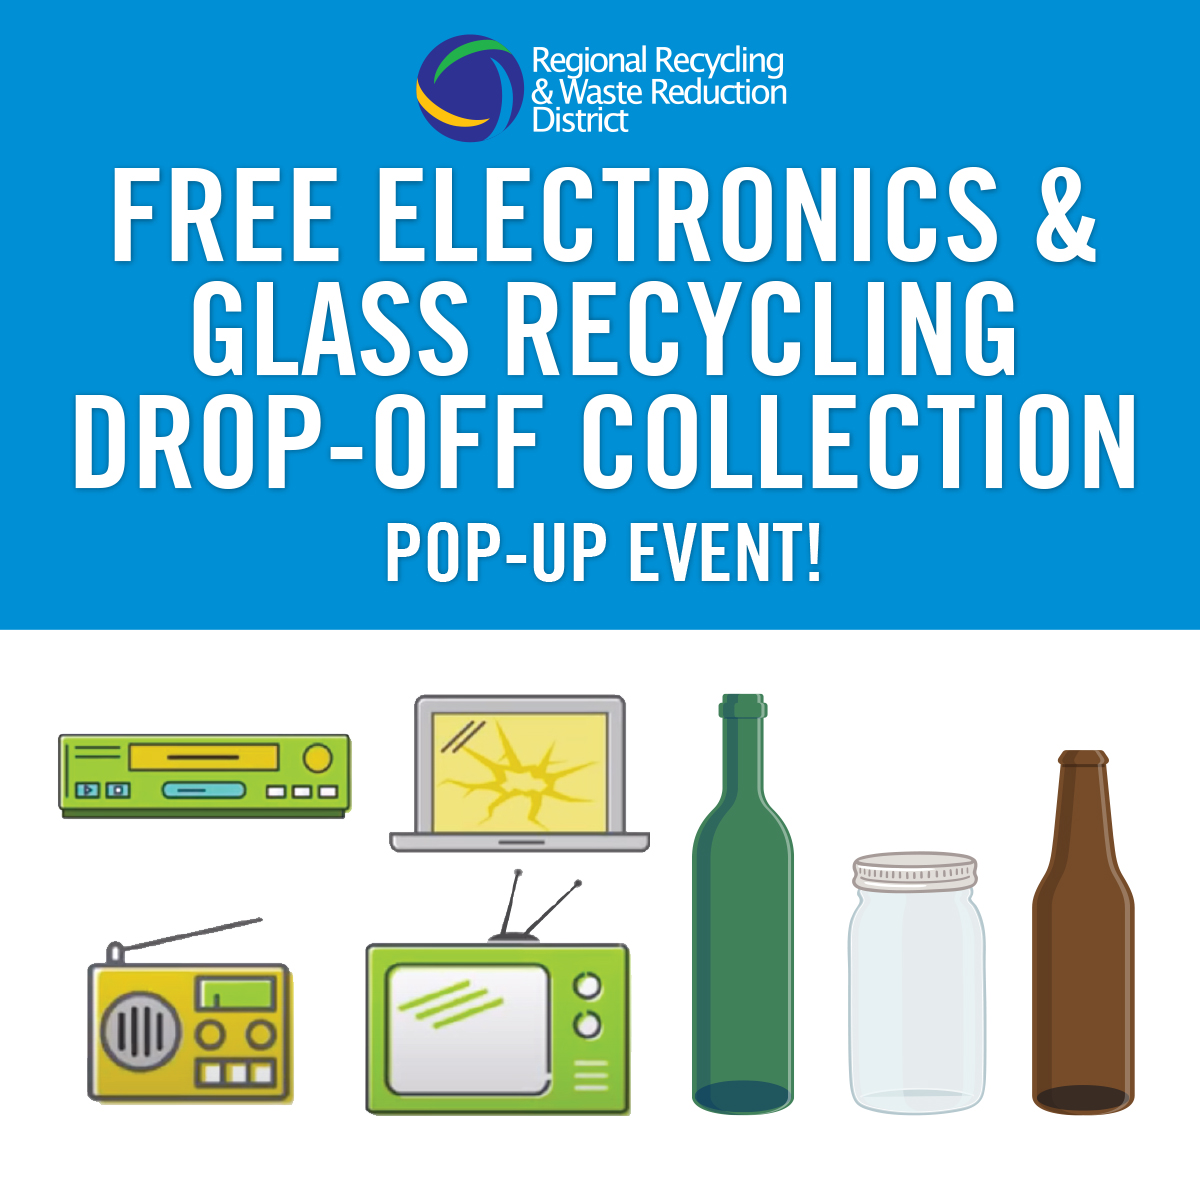 Pop-up Electronic and Glass Recycling Event at Jefferson Elementary